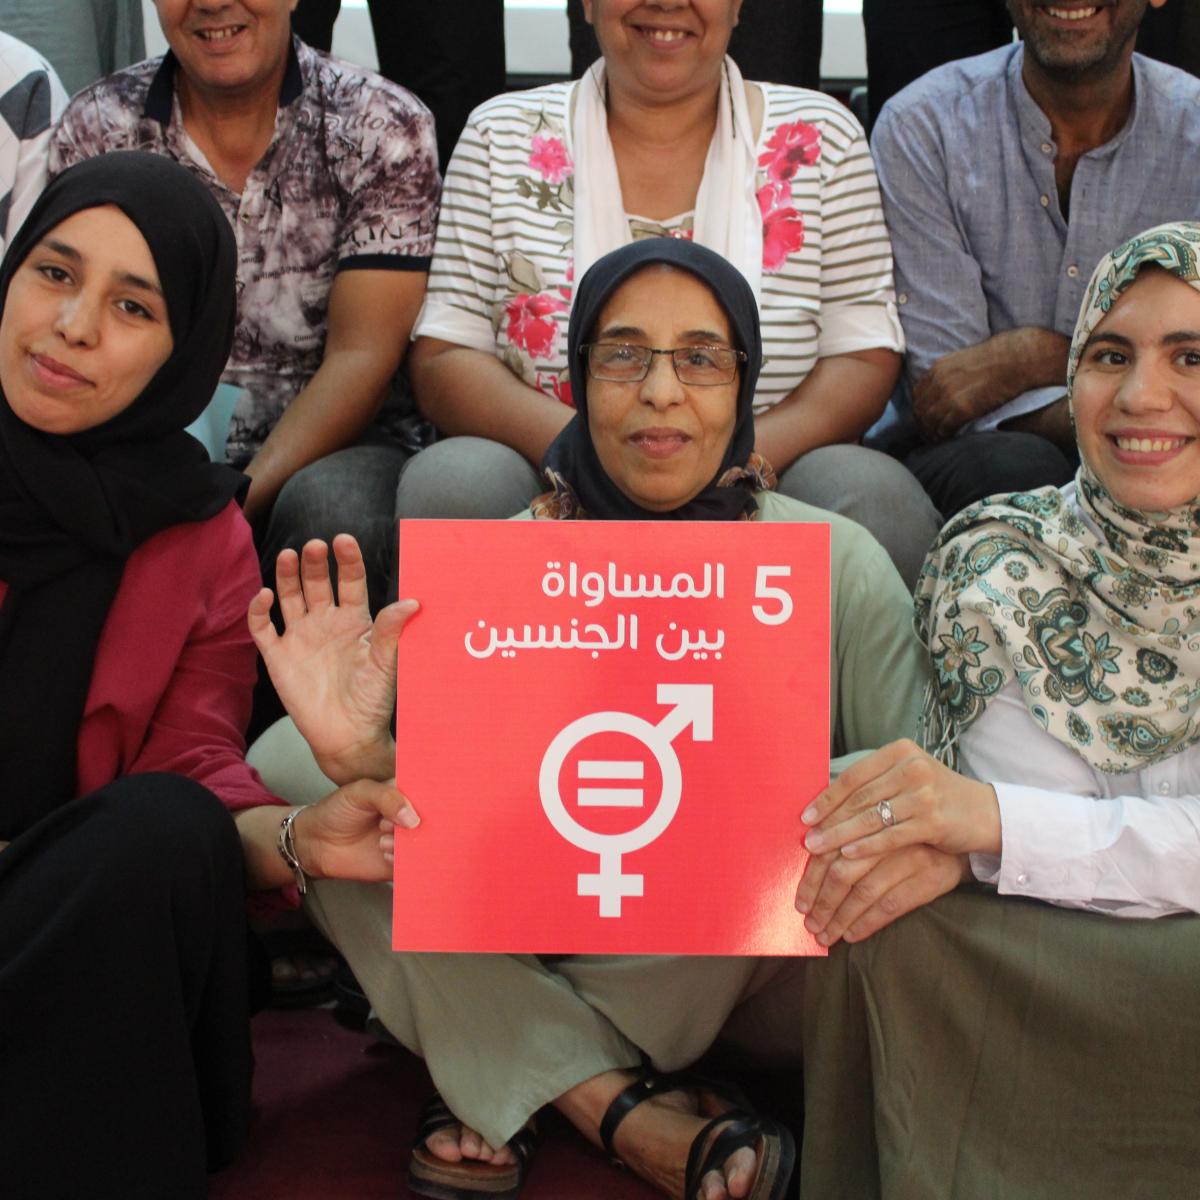 Members of the Ennakhil Association participating in an event to promote gender equality.